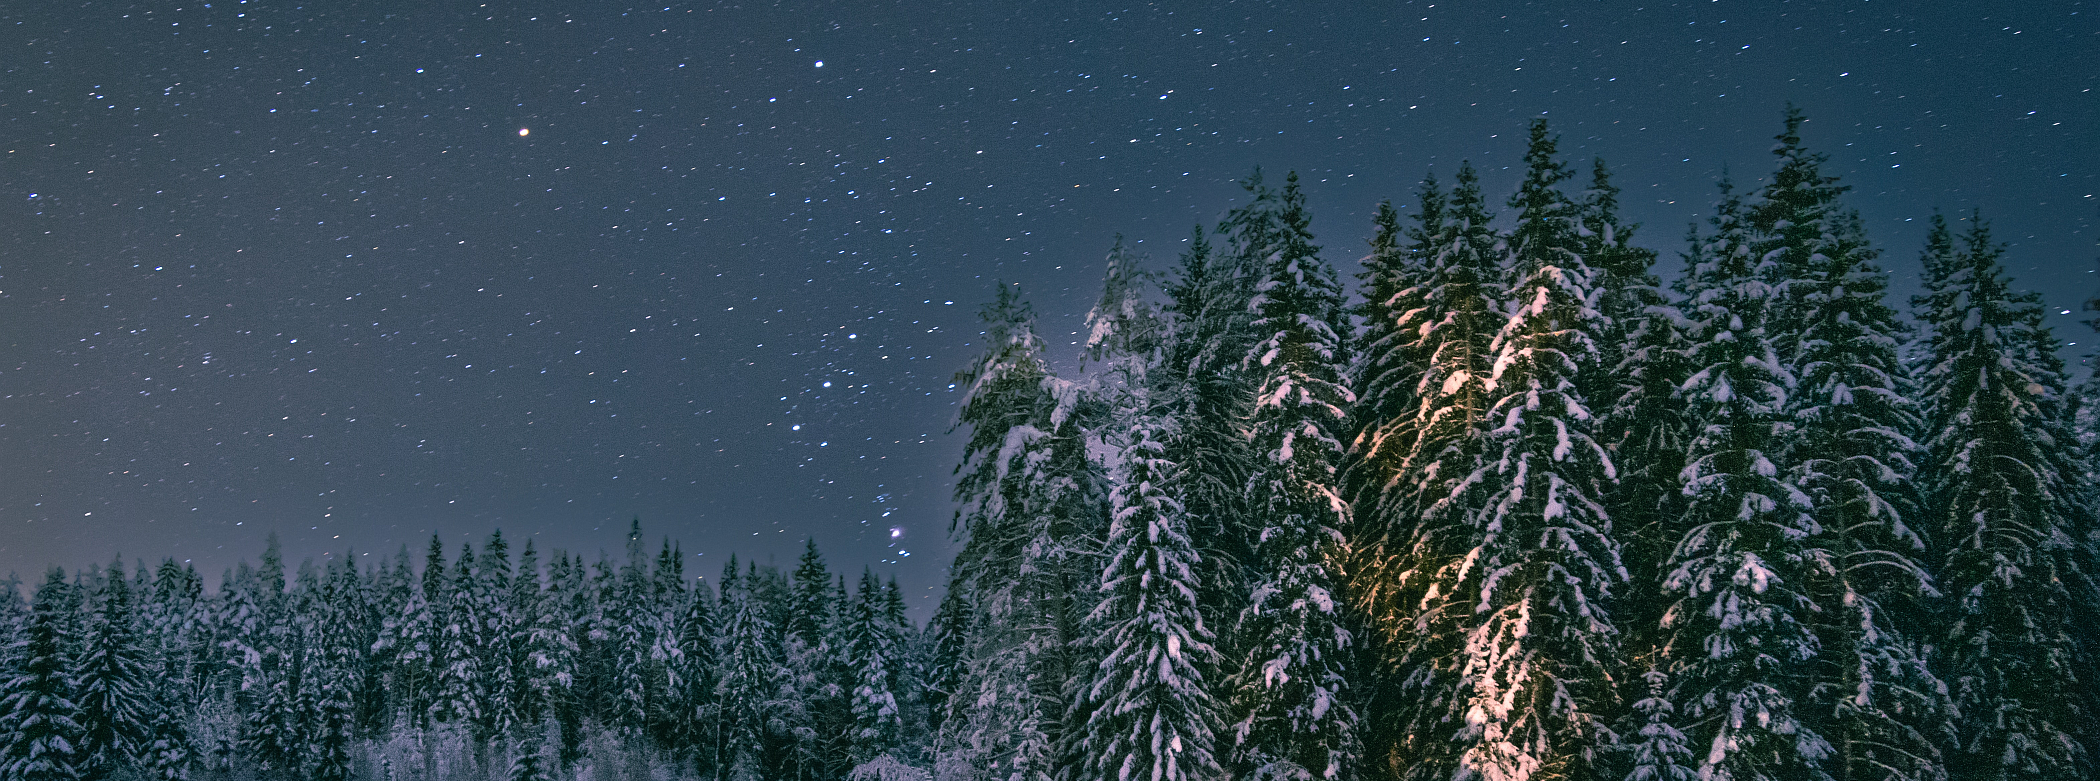 A starry sky over a winter forest scene. The constellation Orion is rising,